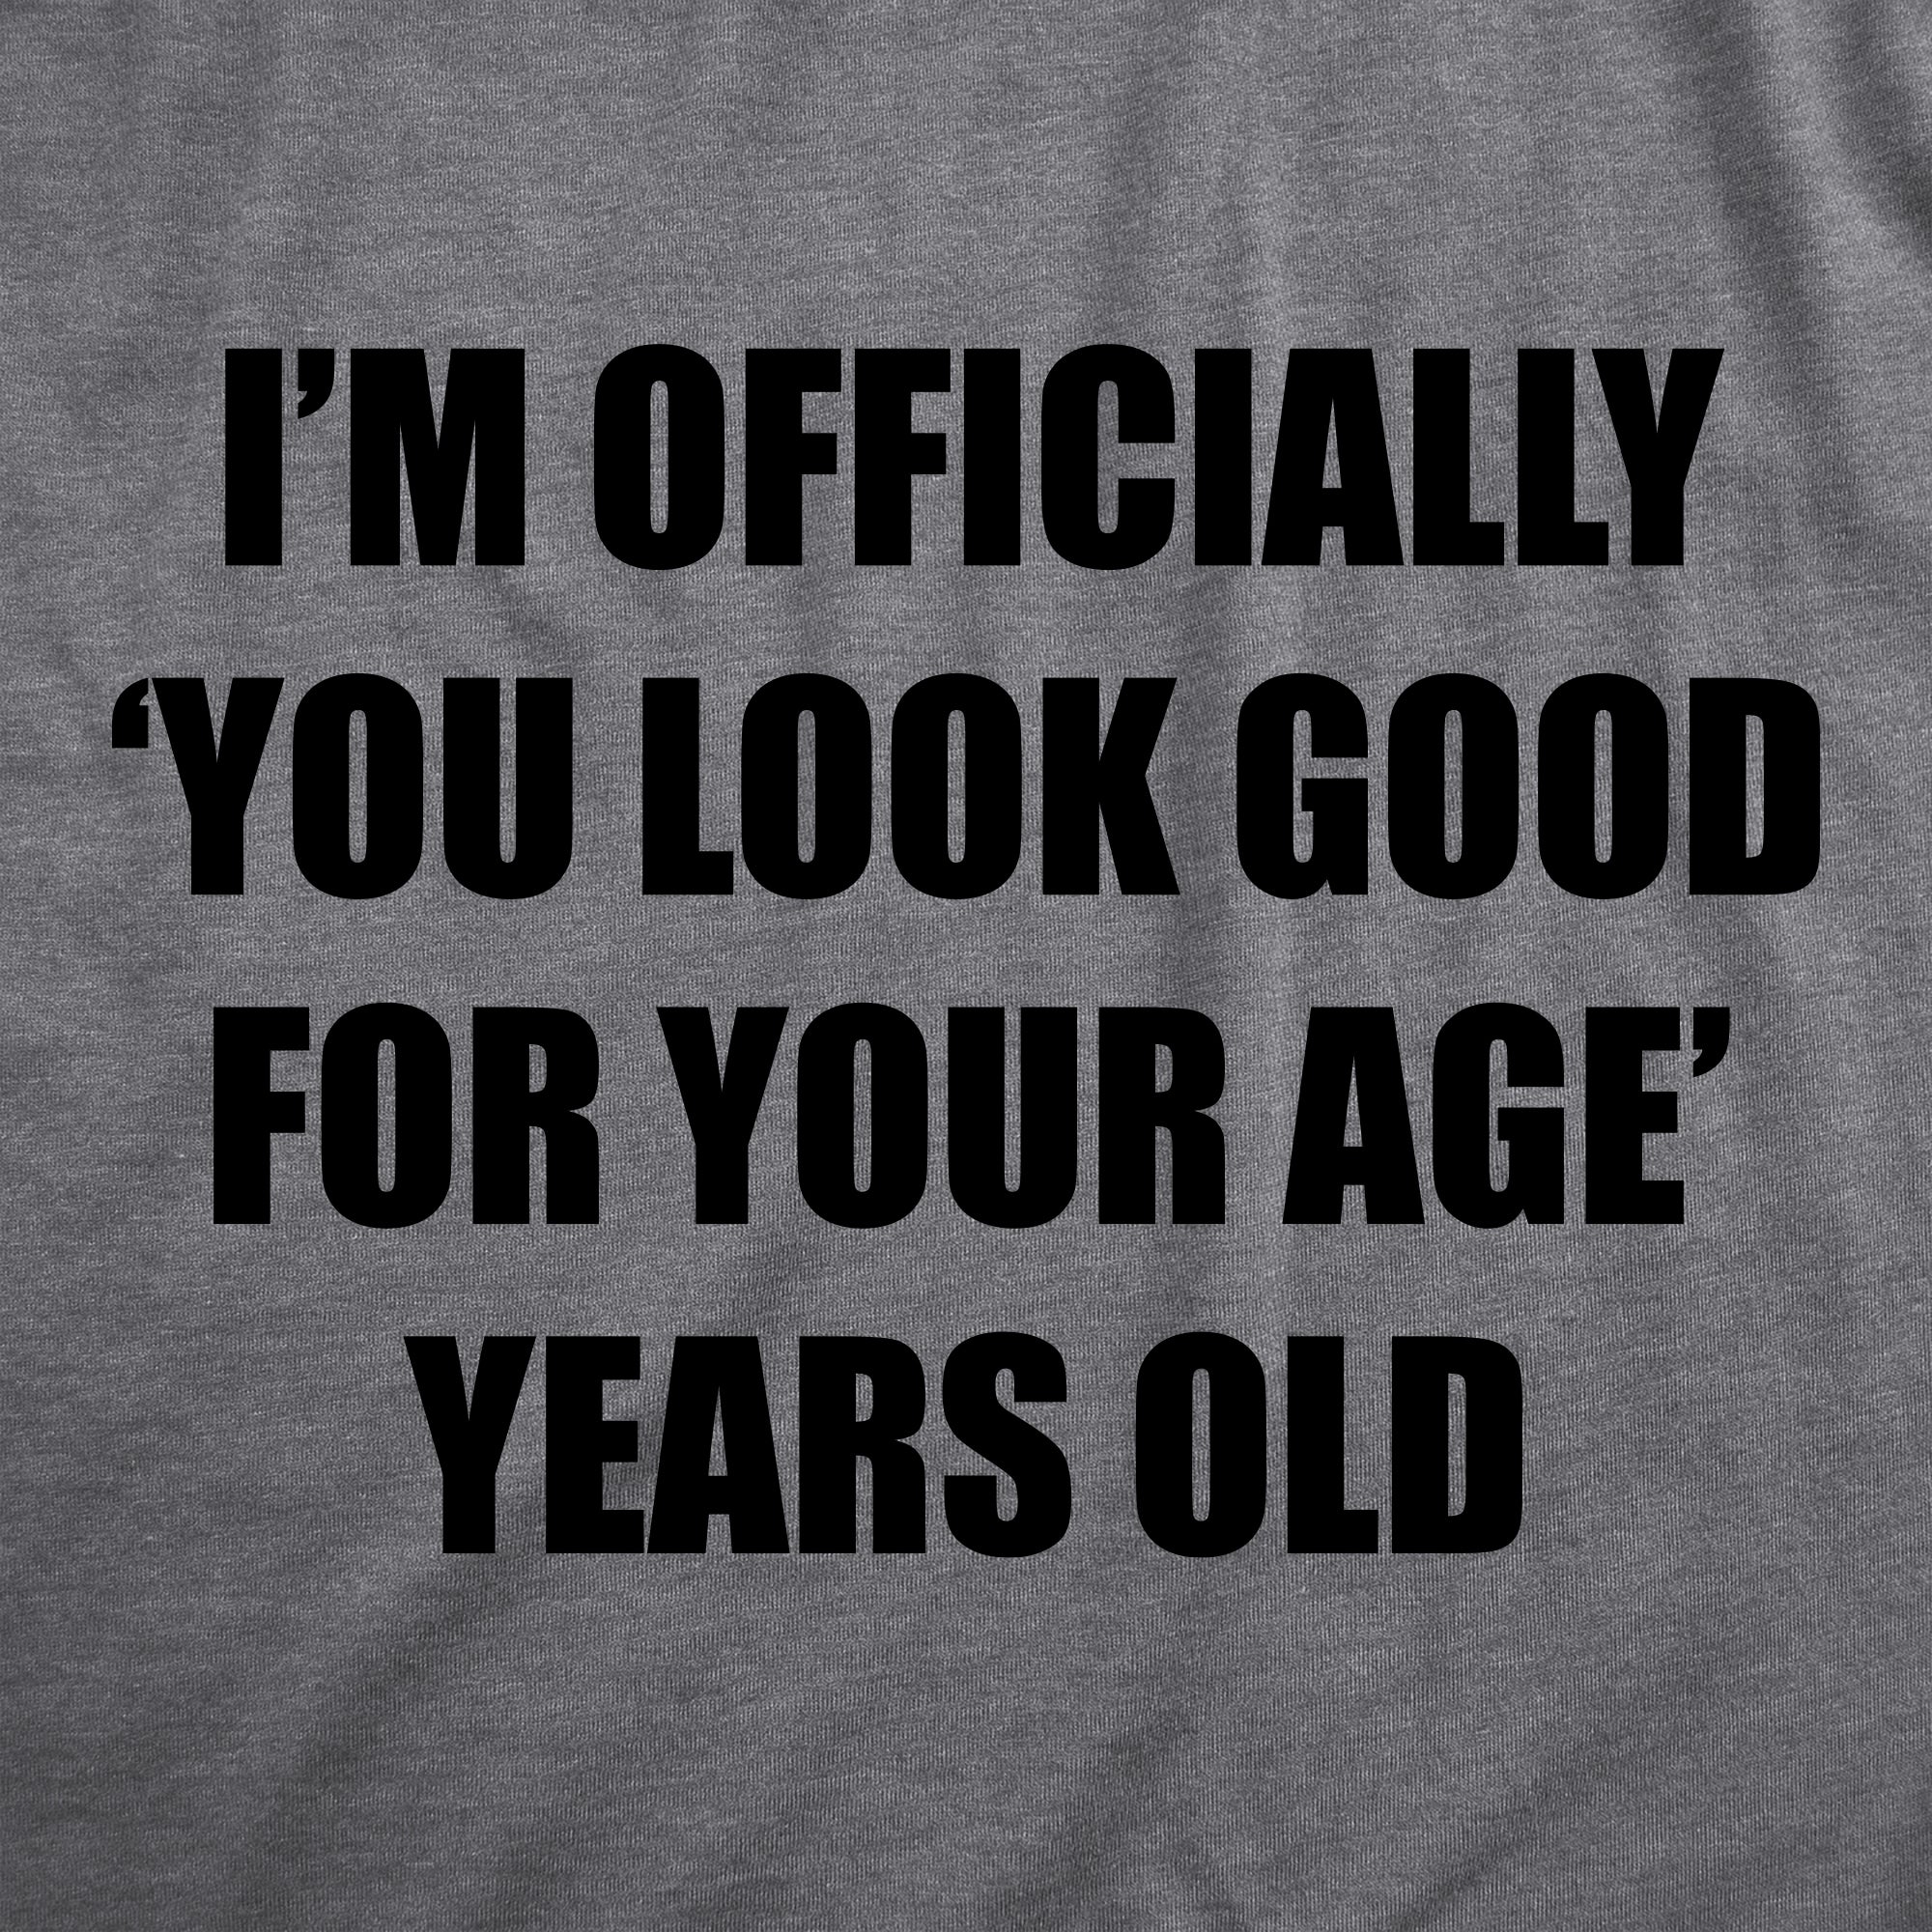 Funny Dark Heather Grey - AGE Im Officially You Look Good For Your Age Years Old Mens T Shirt Nerdy Sarcastic Tee